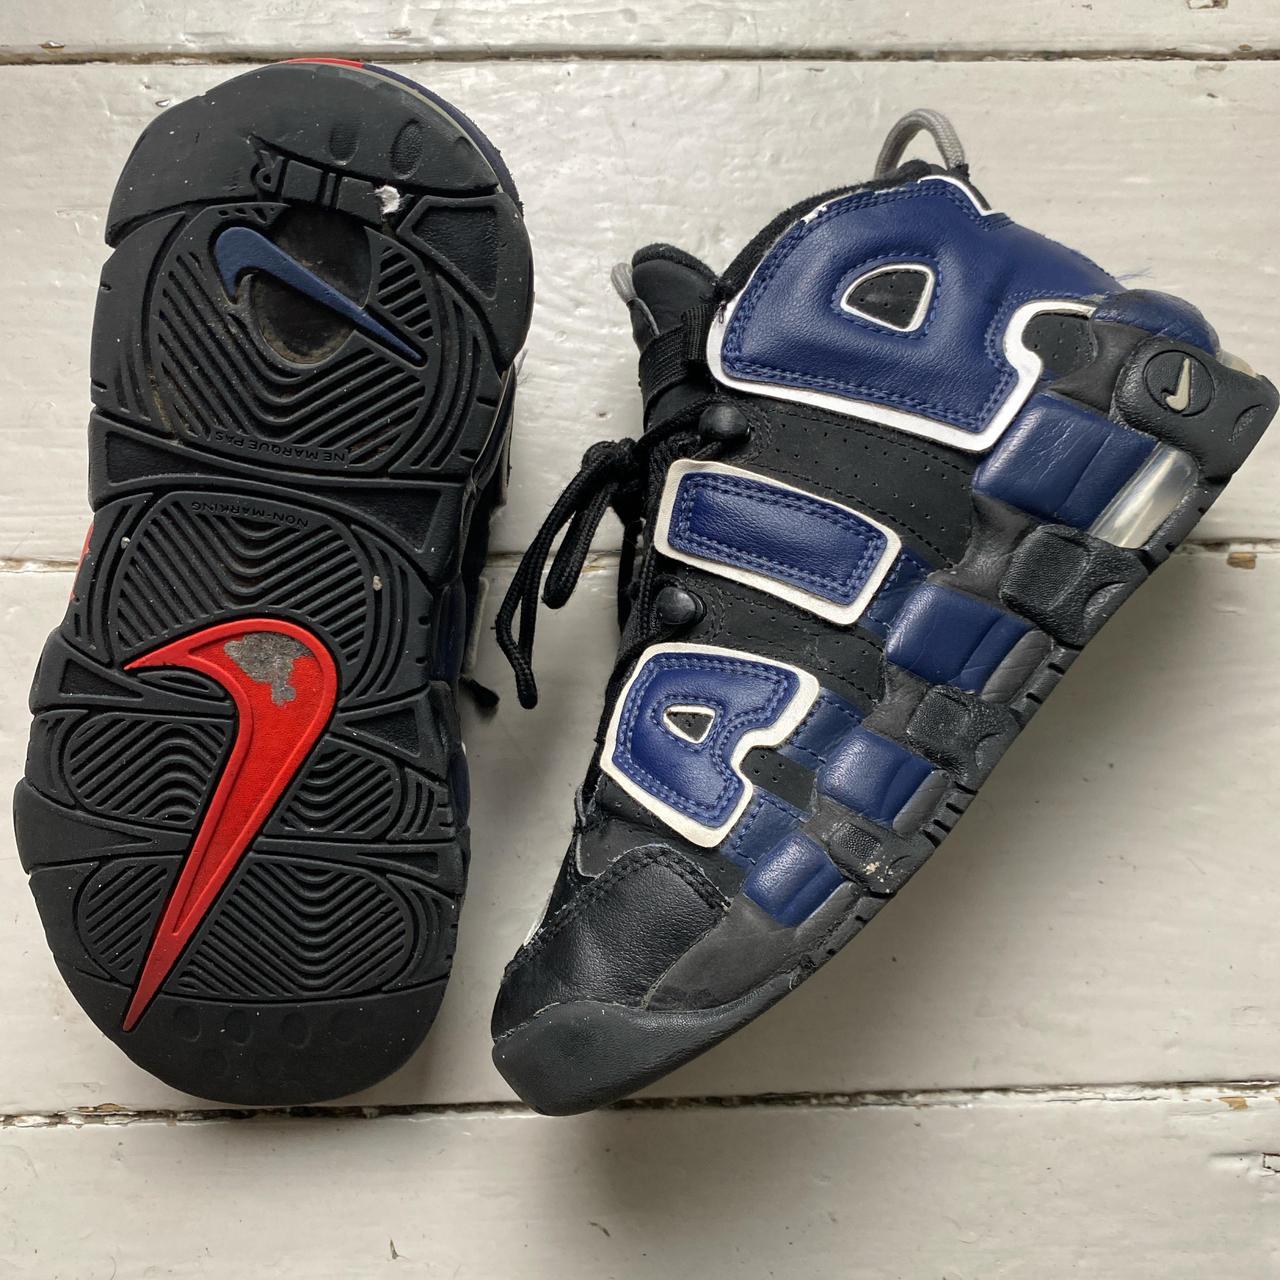 Nike Air Uptempo Black Navy and Red